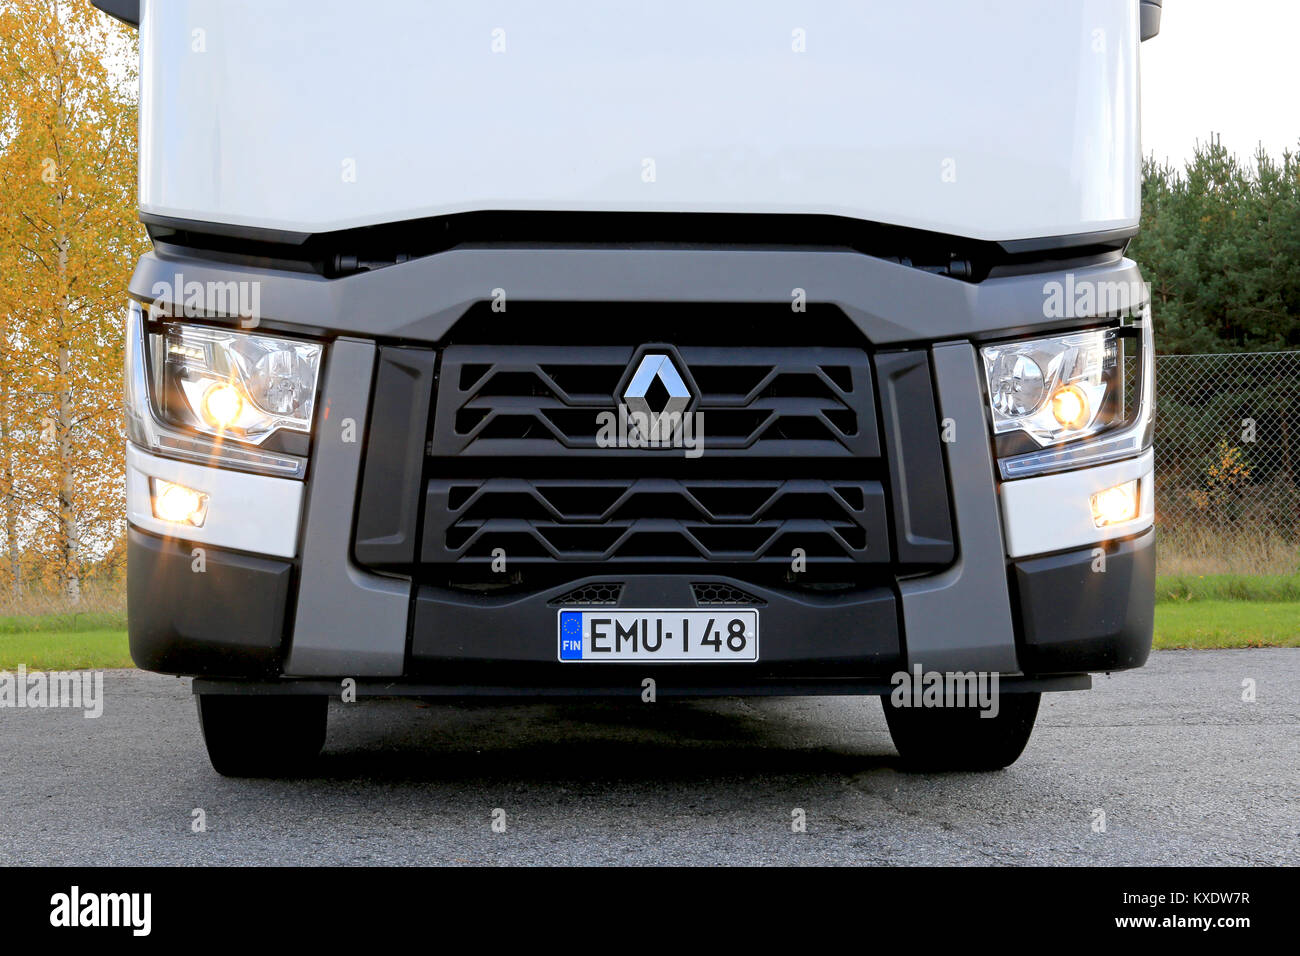 LIETO, FINLAND - OCTOBER 4, 2014: Renault T480 truck tractor with dipped beam lights and cornering lights on. Renault Trucks T is awarded the Internat Stock Photo